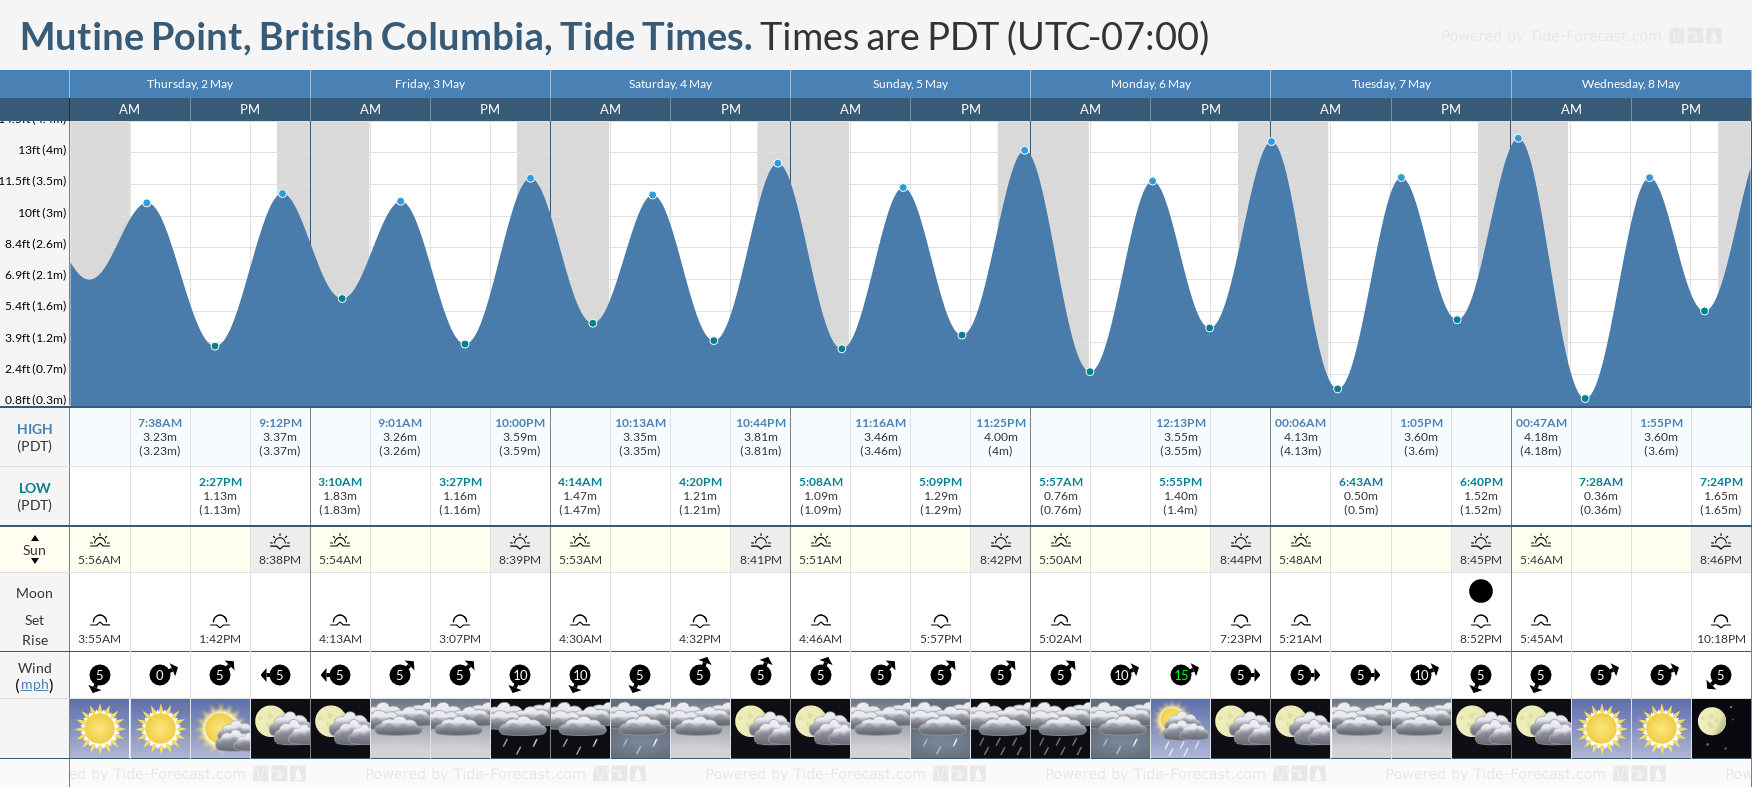 Mutine Point, British Columbia Tide Chart including high and low tide tide times for the next 7 days